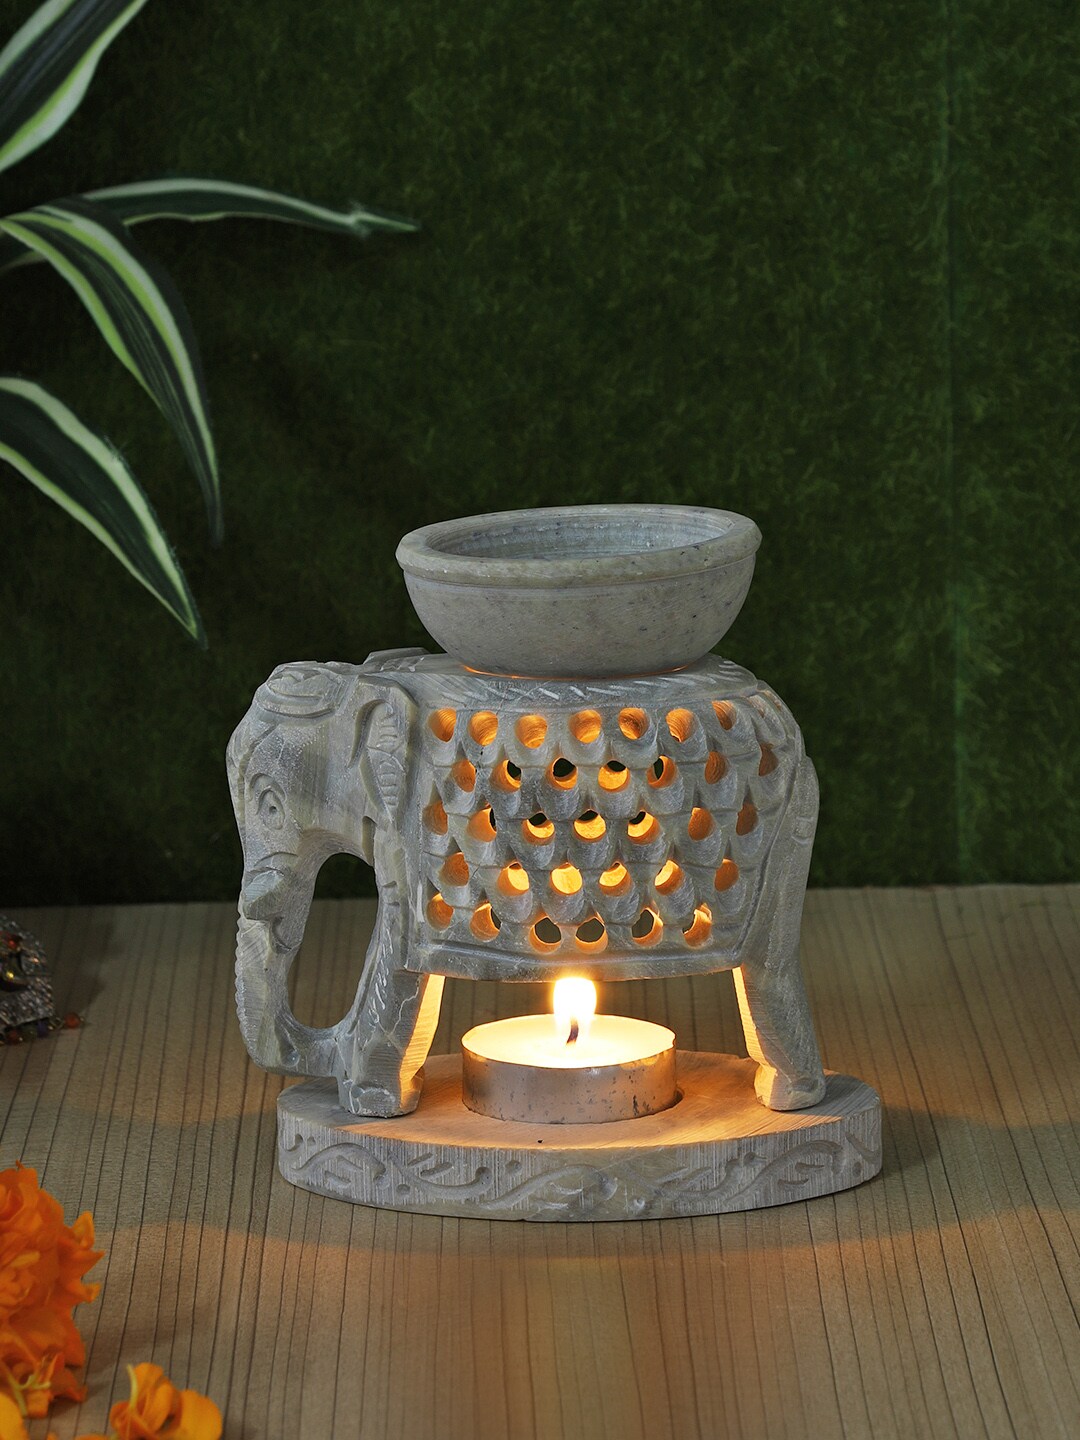 Aapno Rajasthan Elephant Textured Soapstone Tealight Holder with Oil Diffuser Price in India